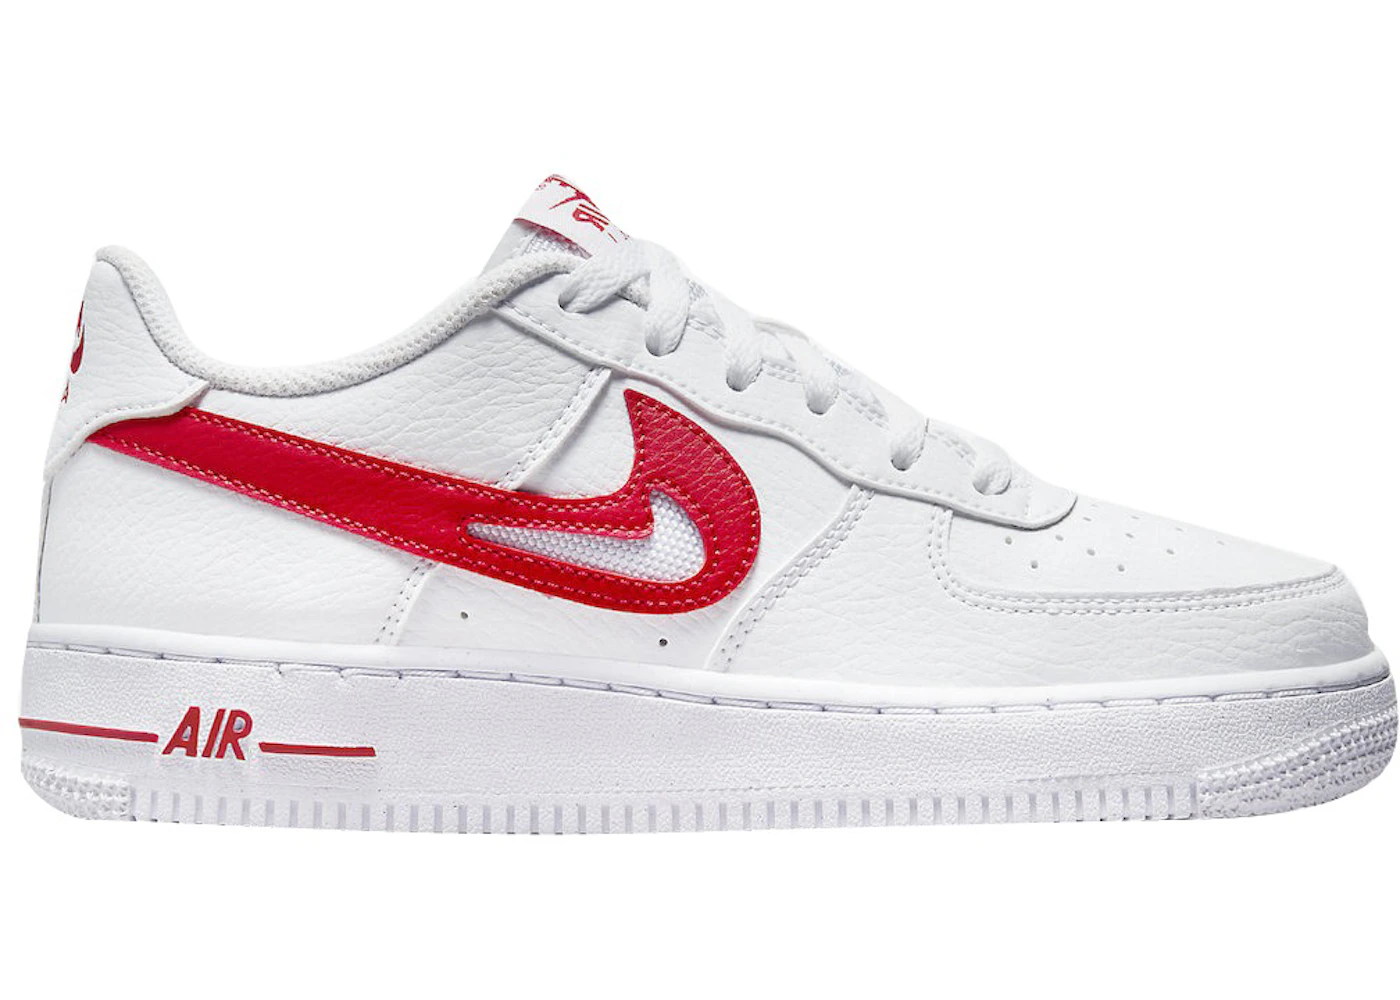 jeugd koffie aardappel Nike Air Force 1 Low White Red Cut-Out Swoosh (GS) - DR7970-100 - US